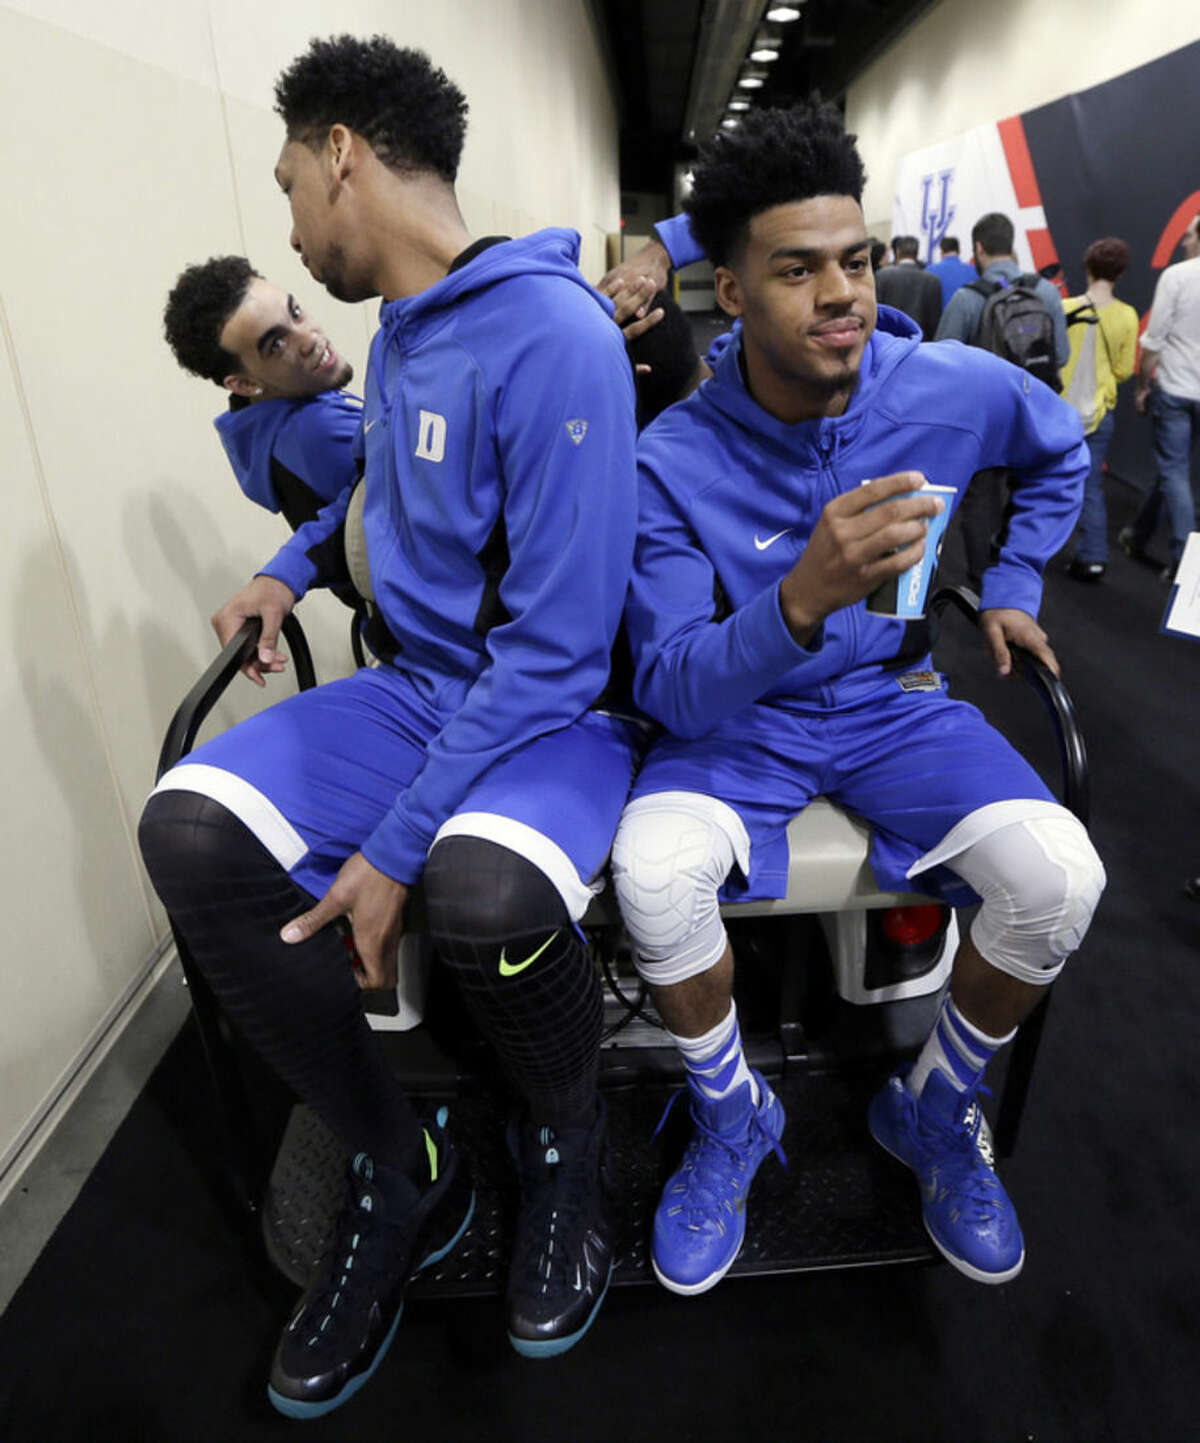 Duke's Tyus Jones, from left, Jahlil Okafor and Quinn Cook get a ride after a news conference for the NCAA Final Four college basketball tournament championship game Sunday, April 5, 2015, in Indianapolis. (AP Photo/Charlie Neibergall)